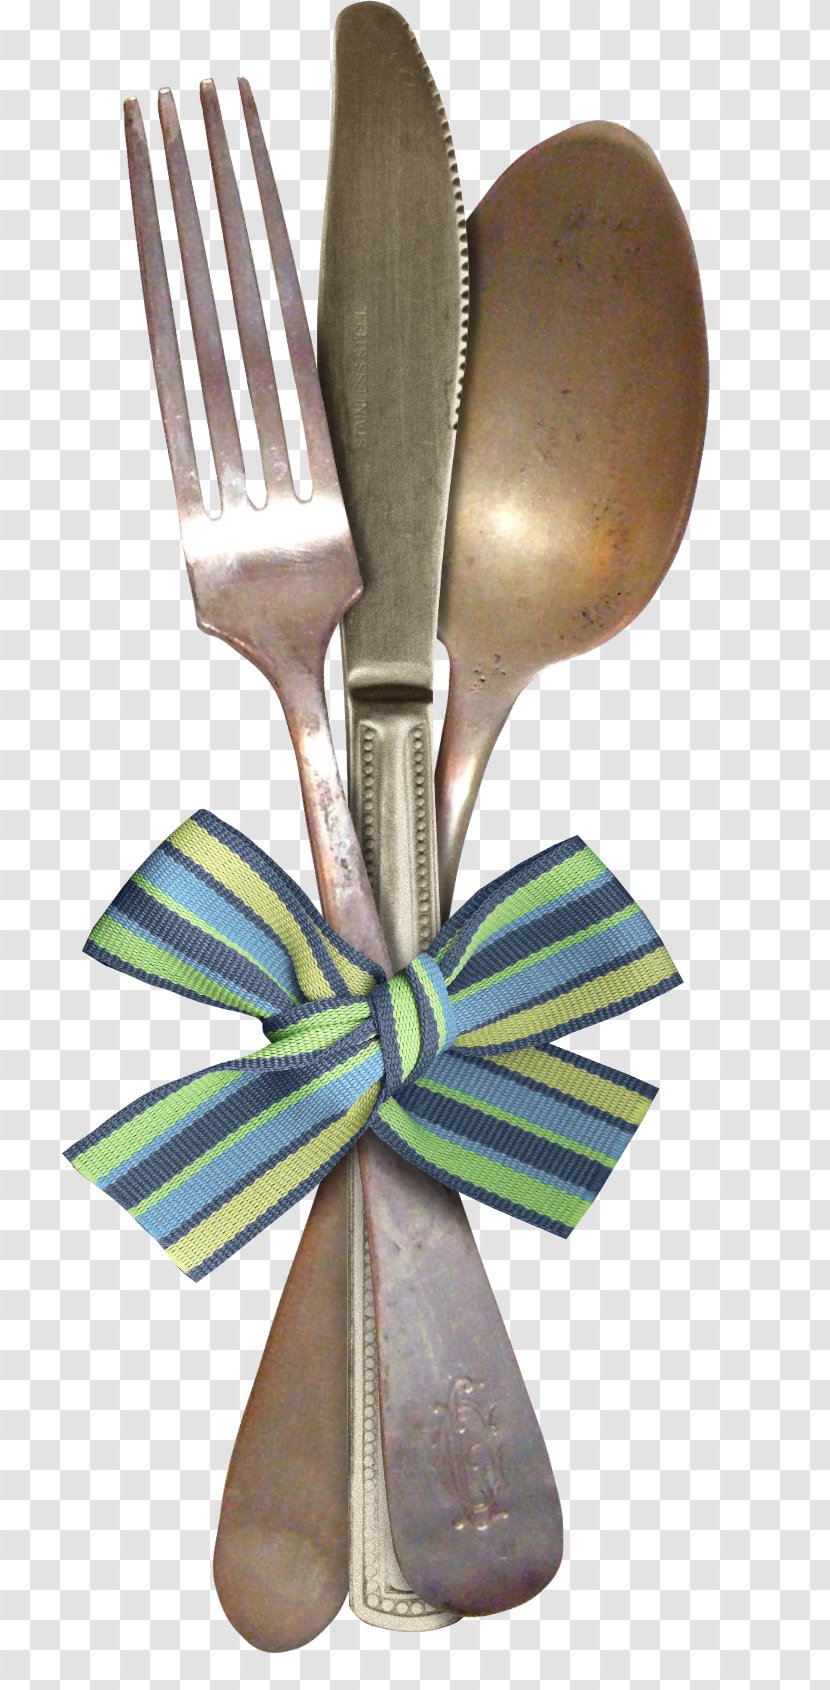 Knife Spoon Napkin Fork - Plate - And Transparent PNG